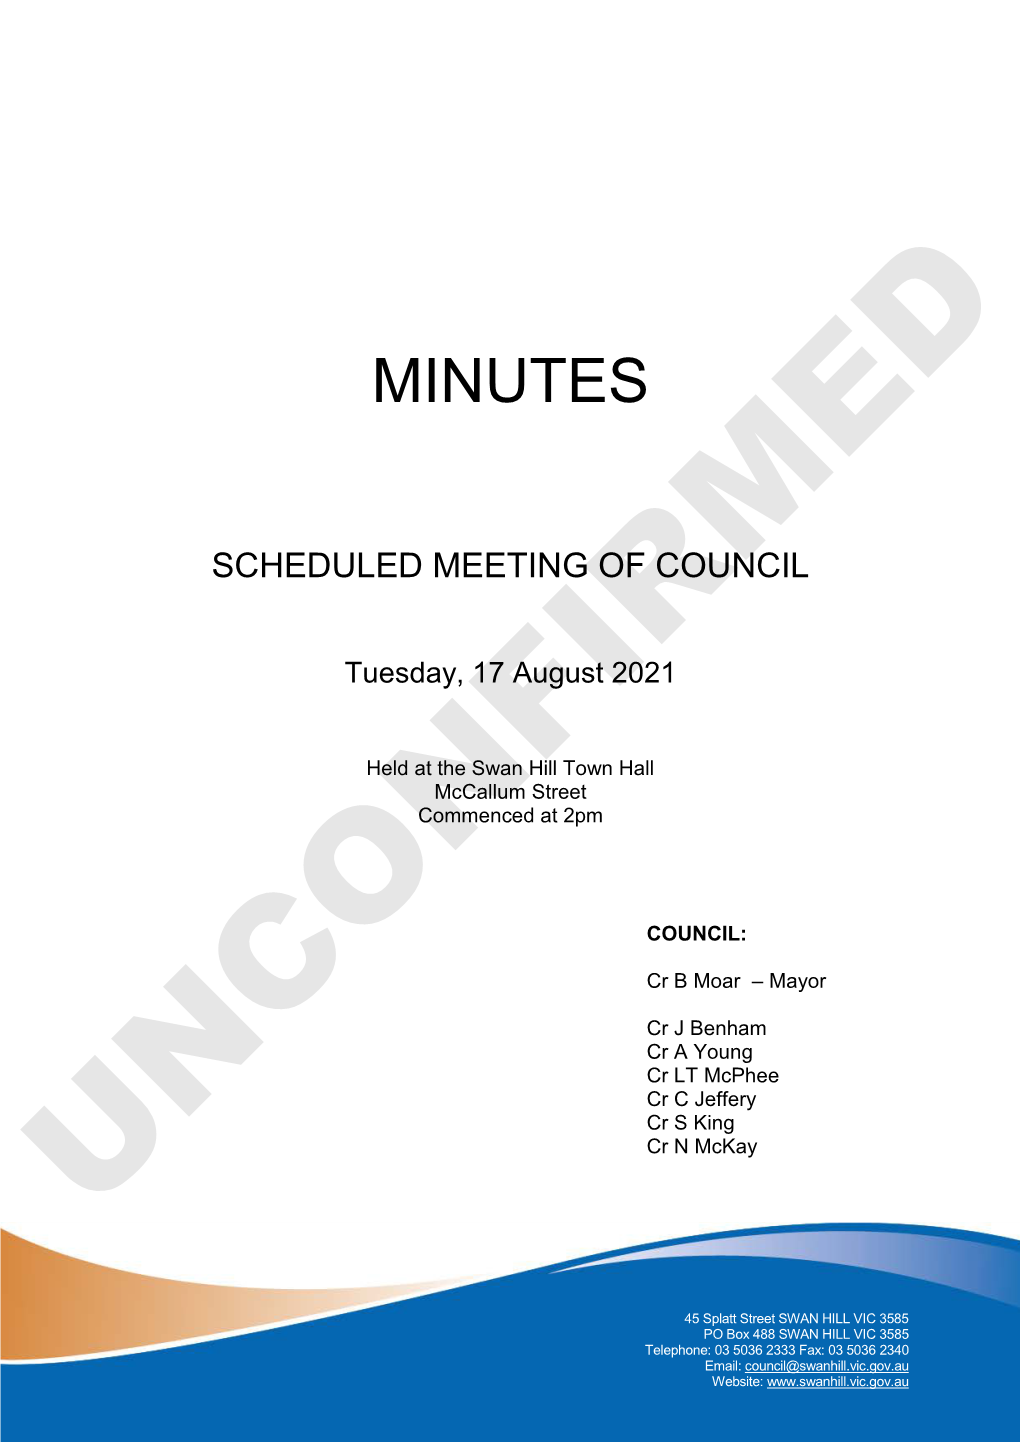 Minutes of Scheduled Meeting of Council